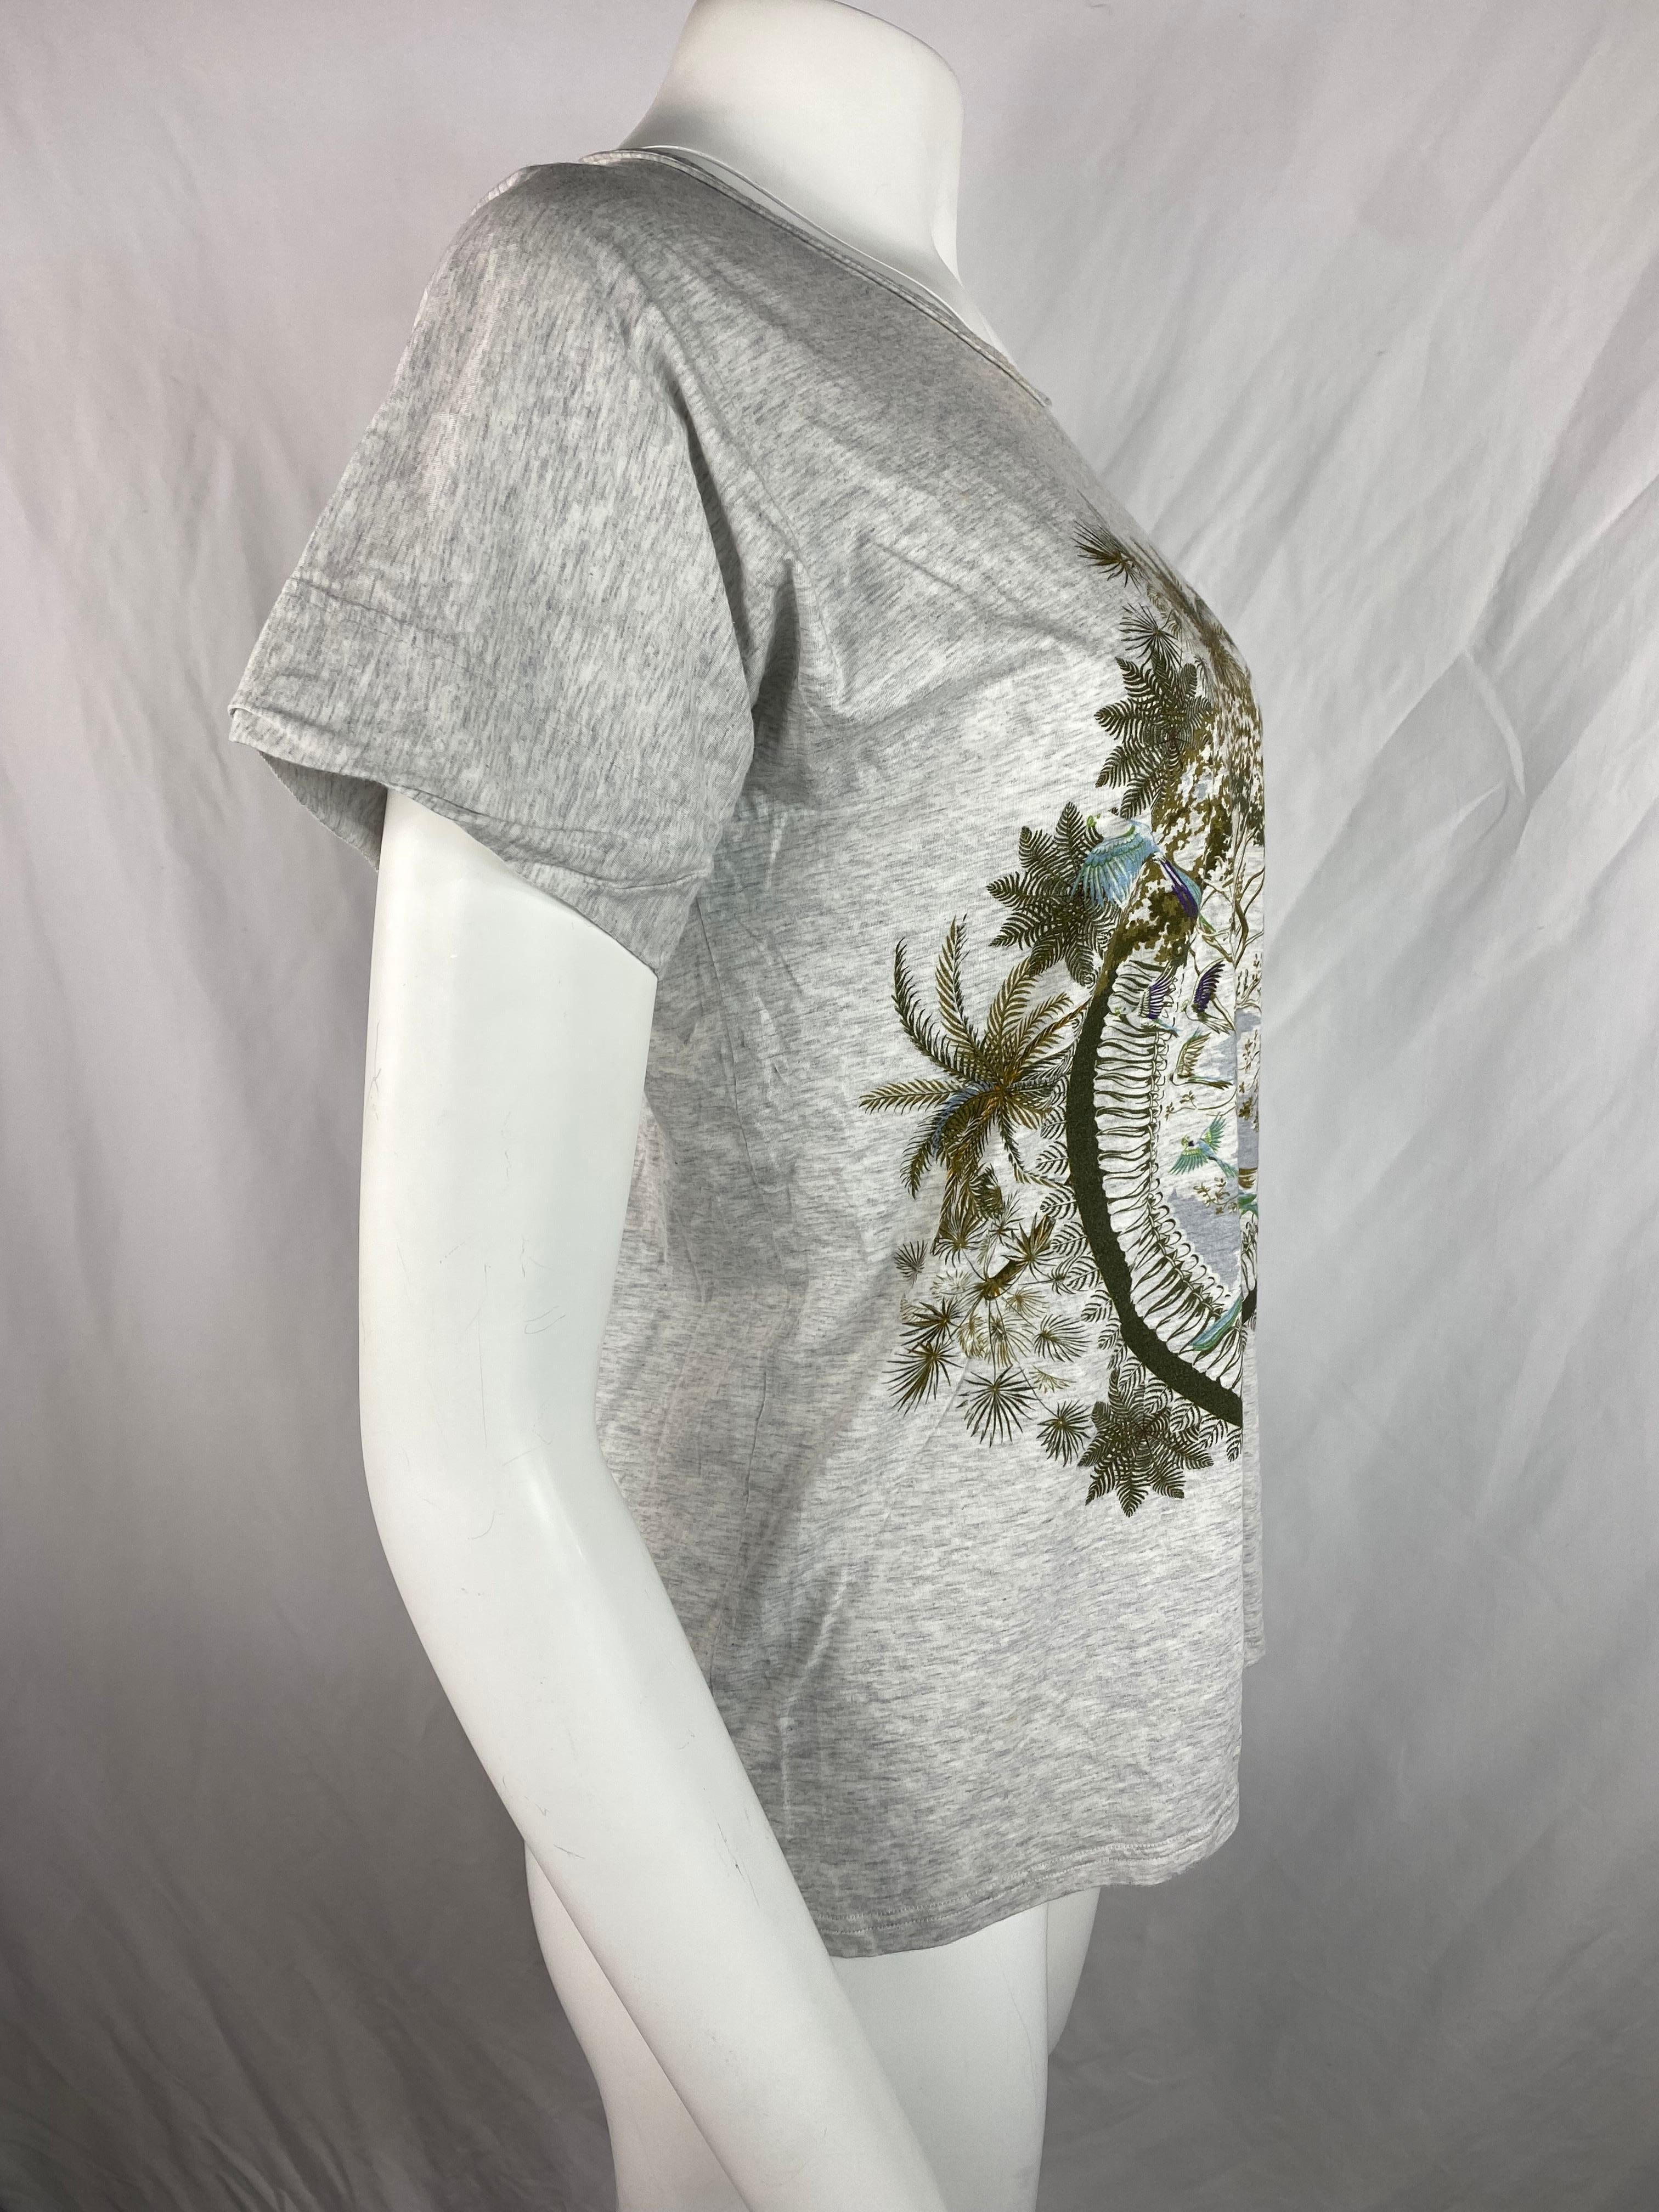 Product details:

The t- shirt is made out of 100% cotton, featuring short sleeves, crew neck line and floral, palm trees, tree of life and blue birds print on the front.